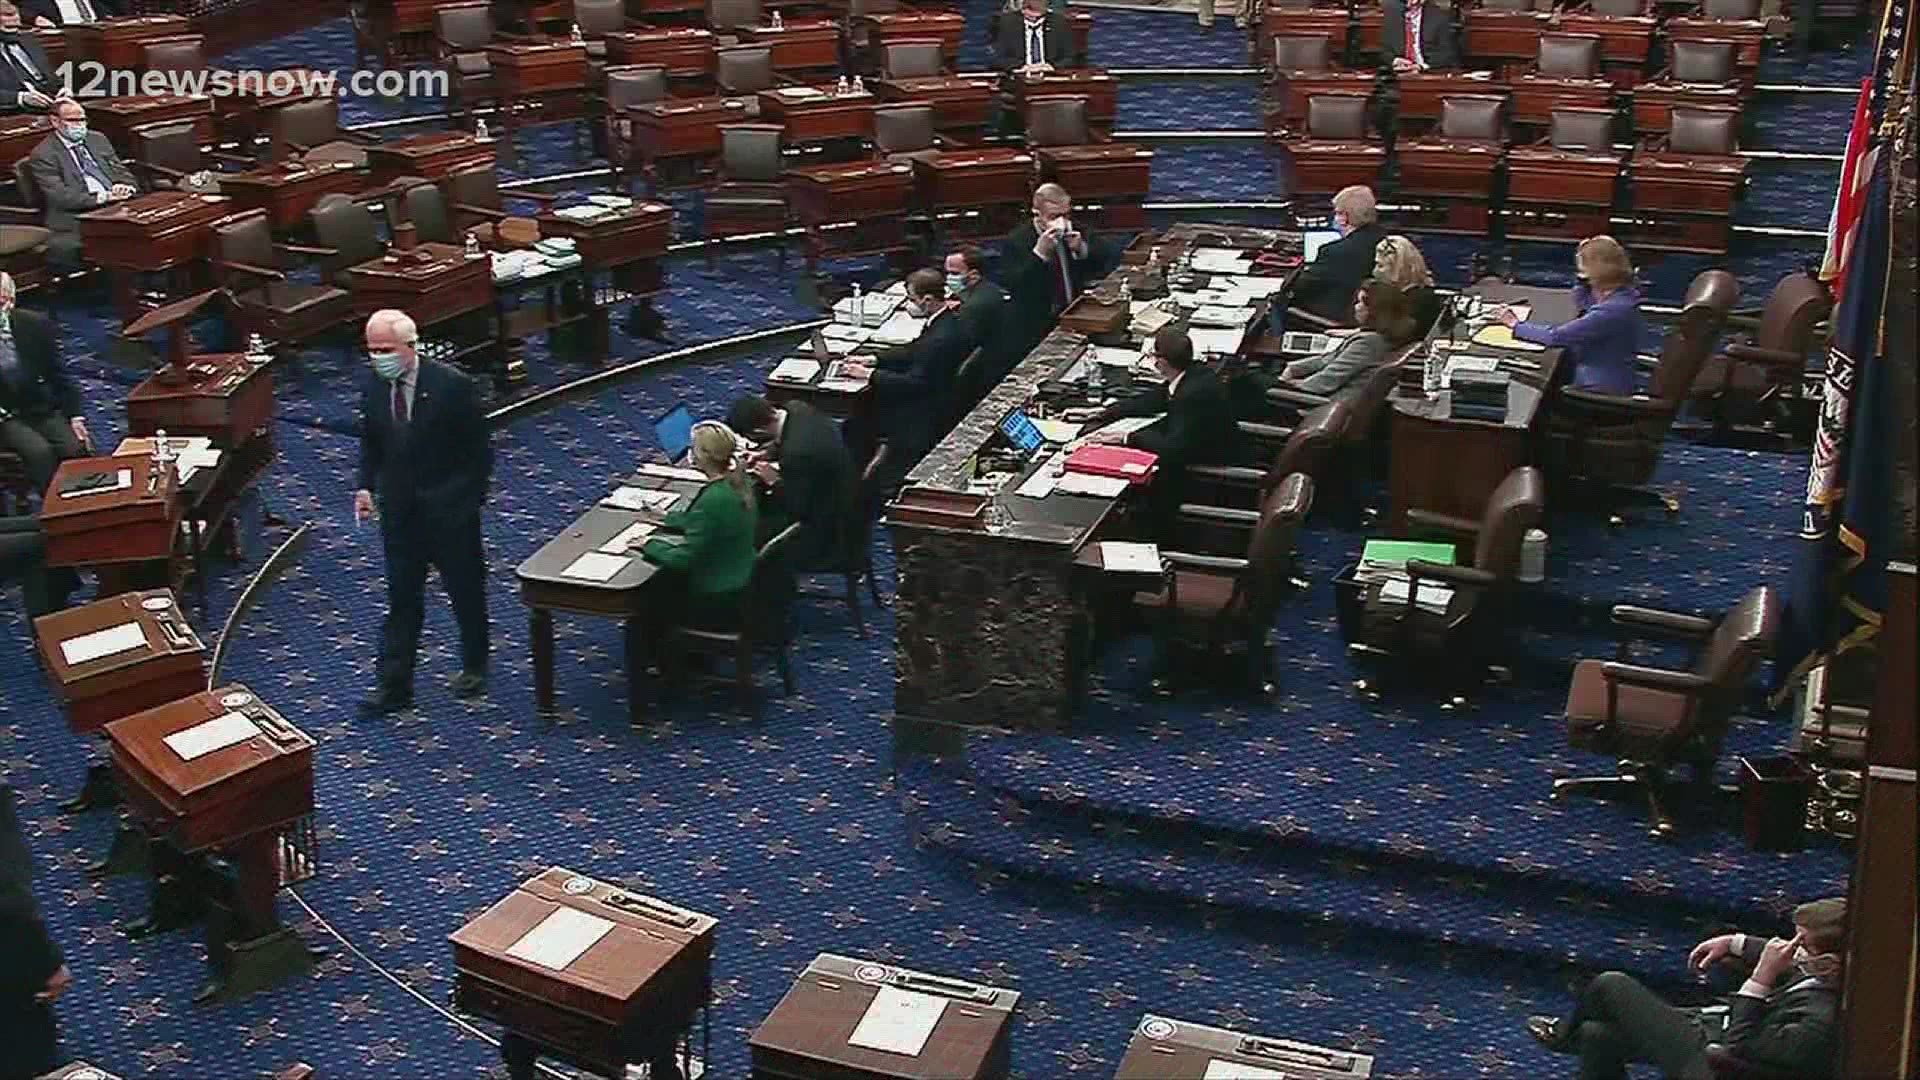 A live look from the Senate floor, where a stimulus "vote-a-rama" is likely to continue into the early morning hours.